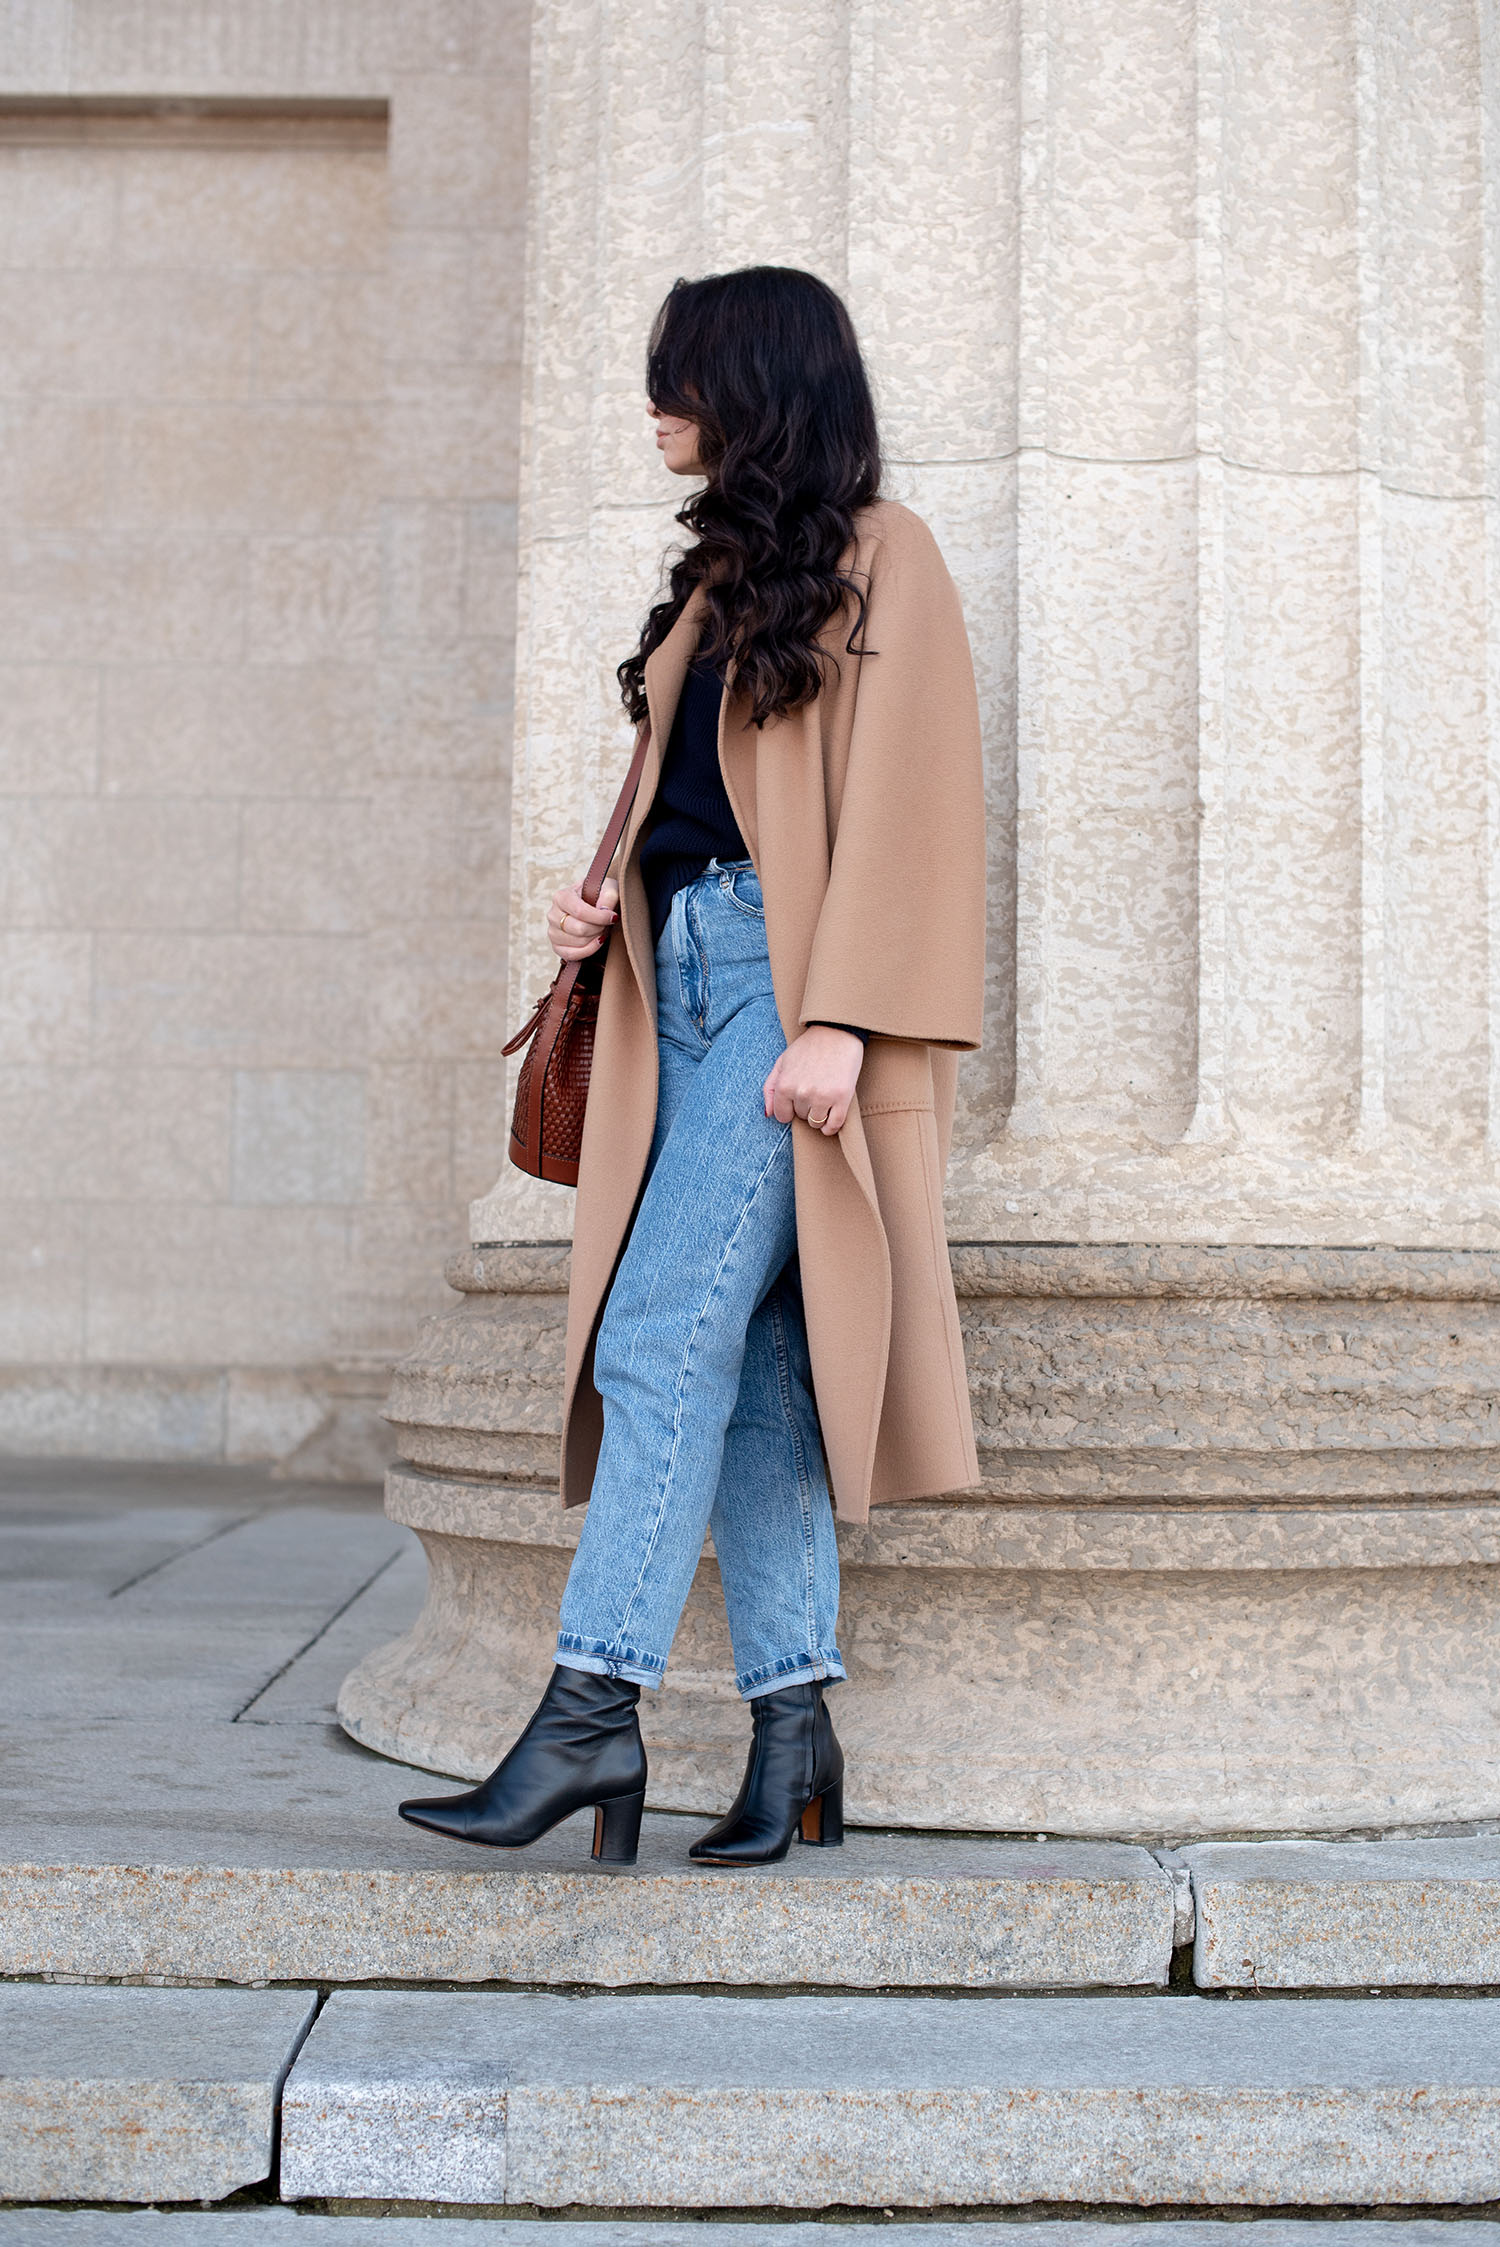 Coco & Vera - The Curated camel coat, Zara jeans, Rouje boots